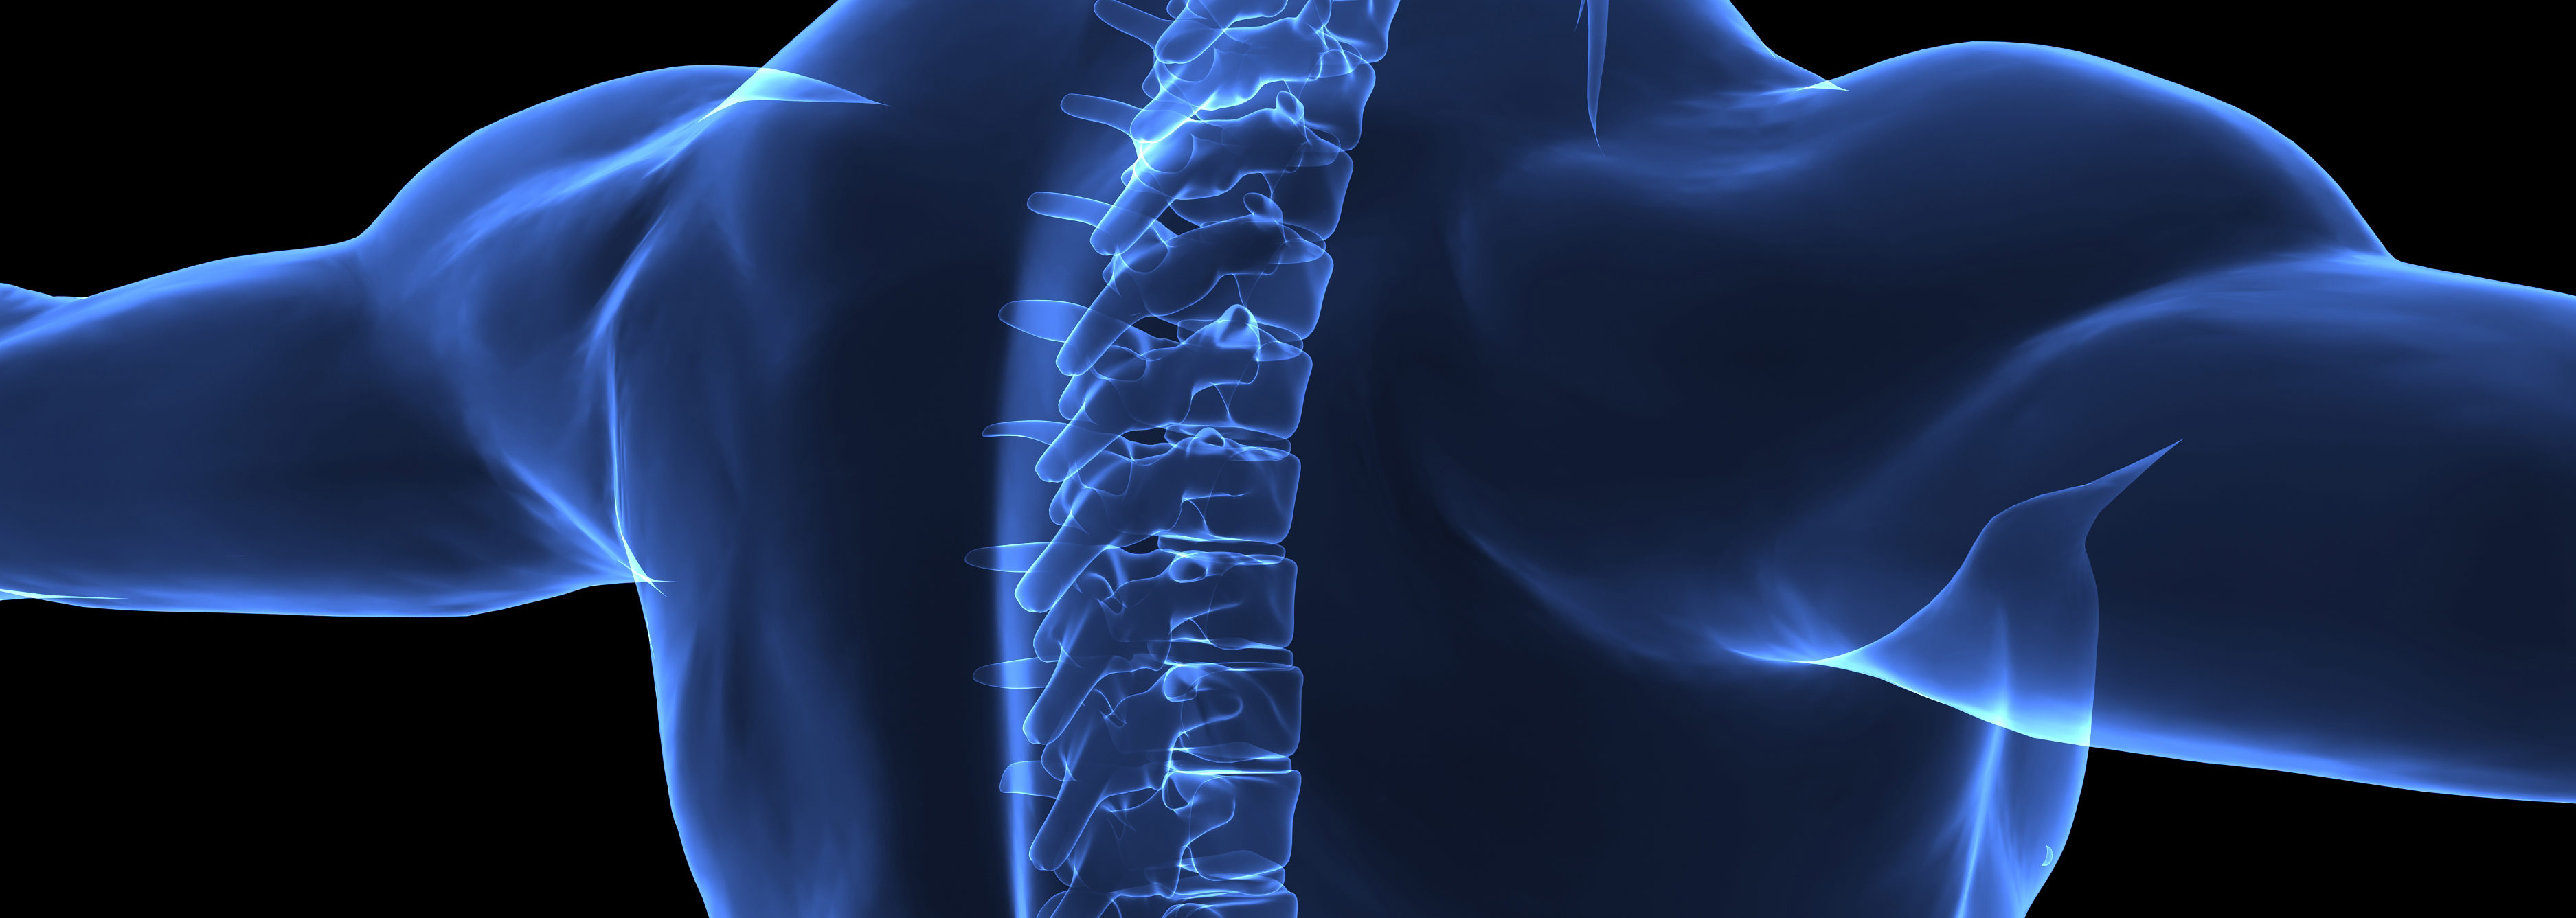 Spine Anatomy: Vertabrae Numbers Explained - Absolute Life ...